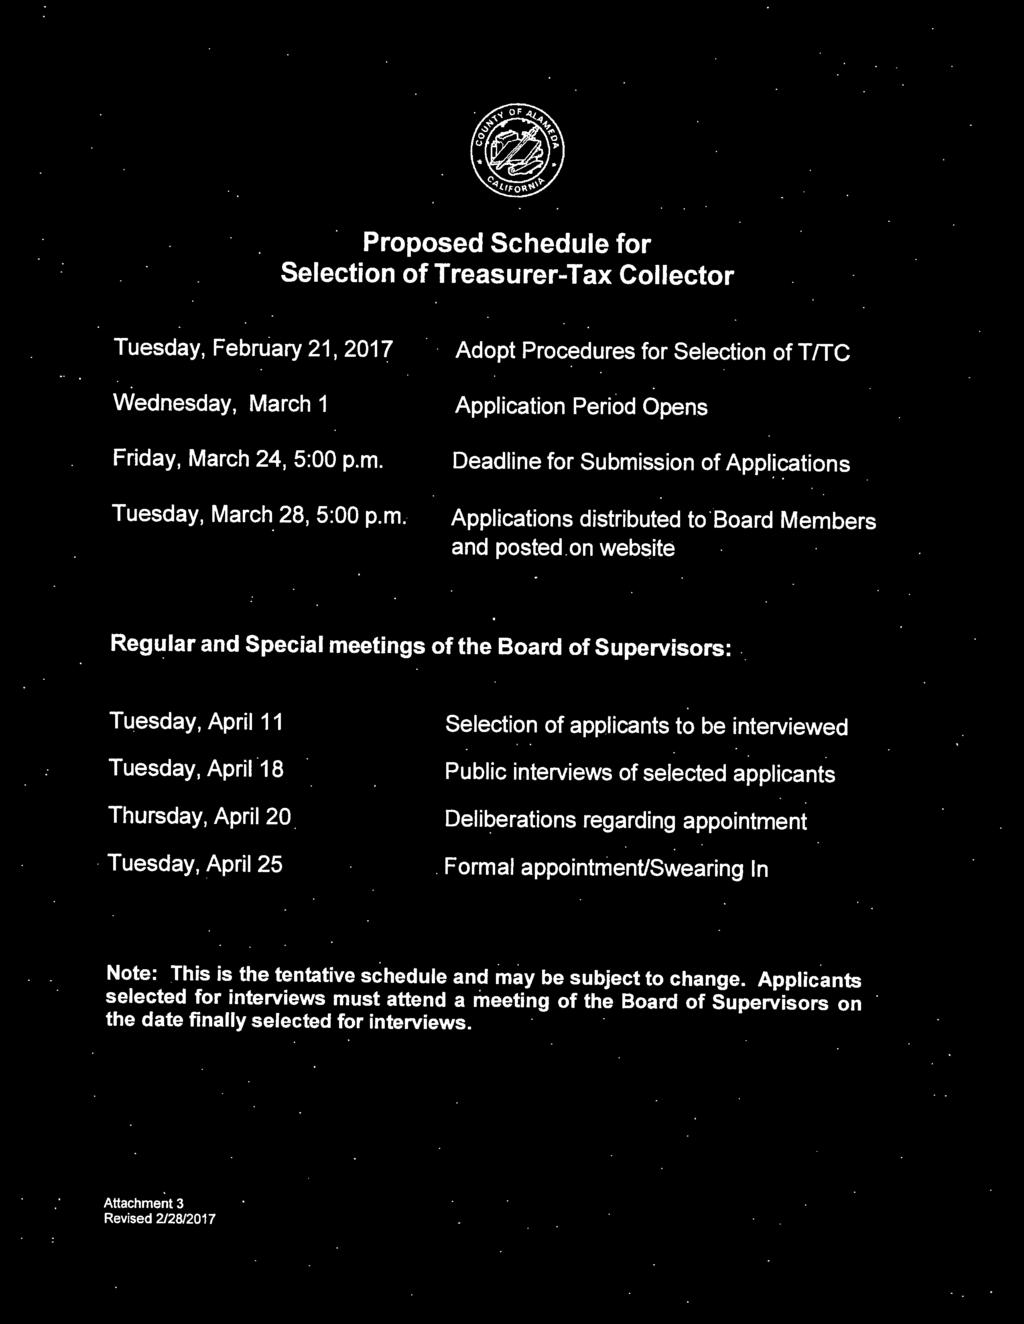 cations Applications distributed to Board Members and posted on website Regular and Special meetings of the Board of Supervisors: Tuesday,